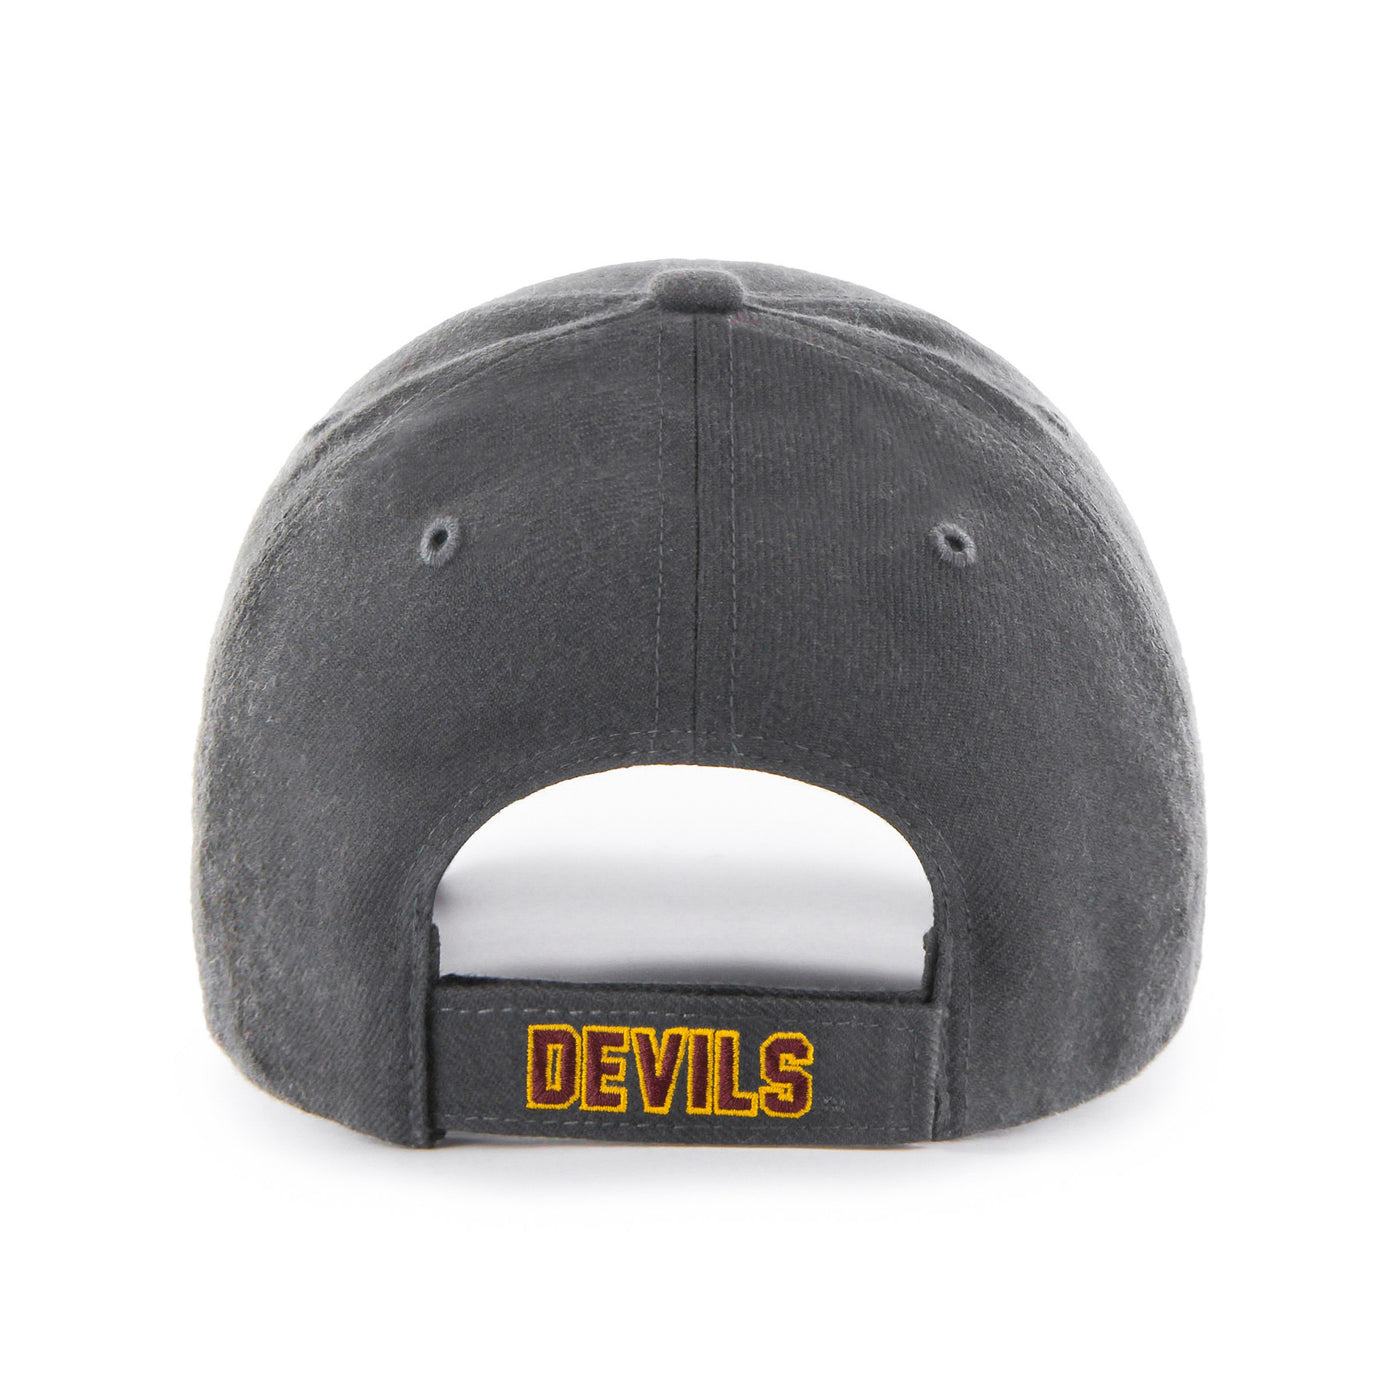 Back side of asu charcoal hat with the text 